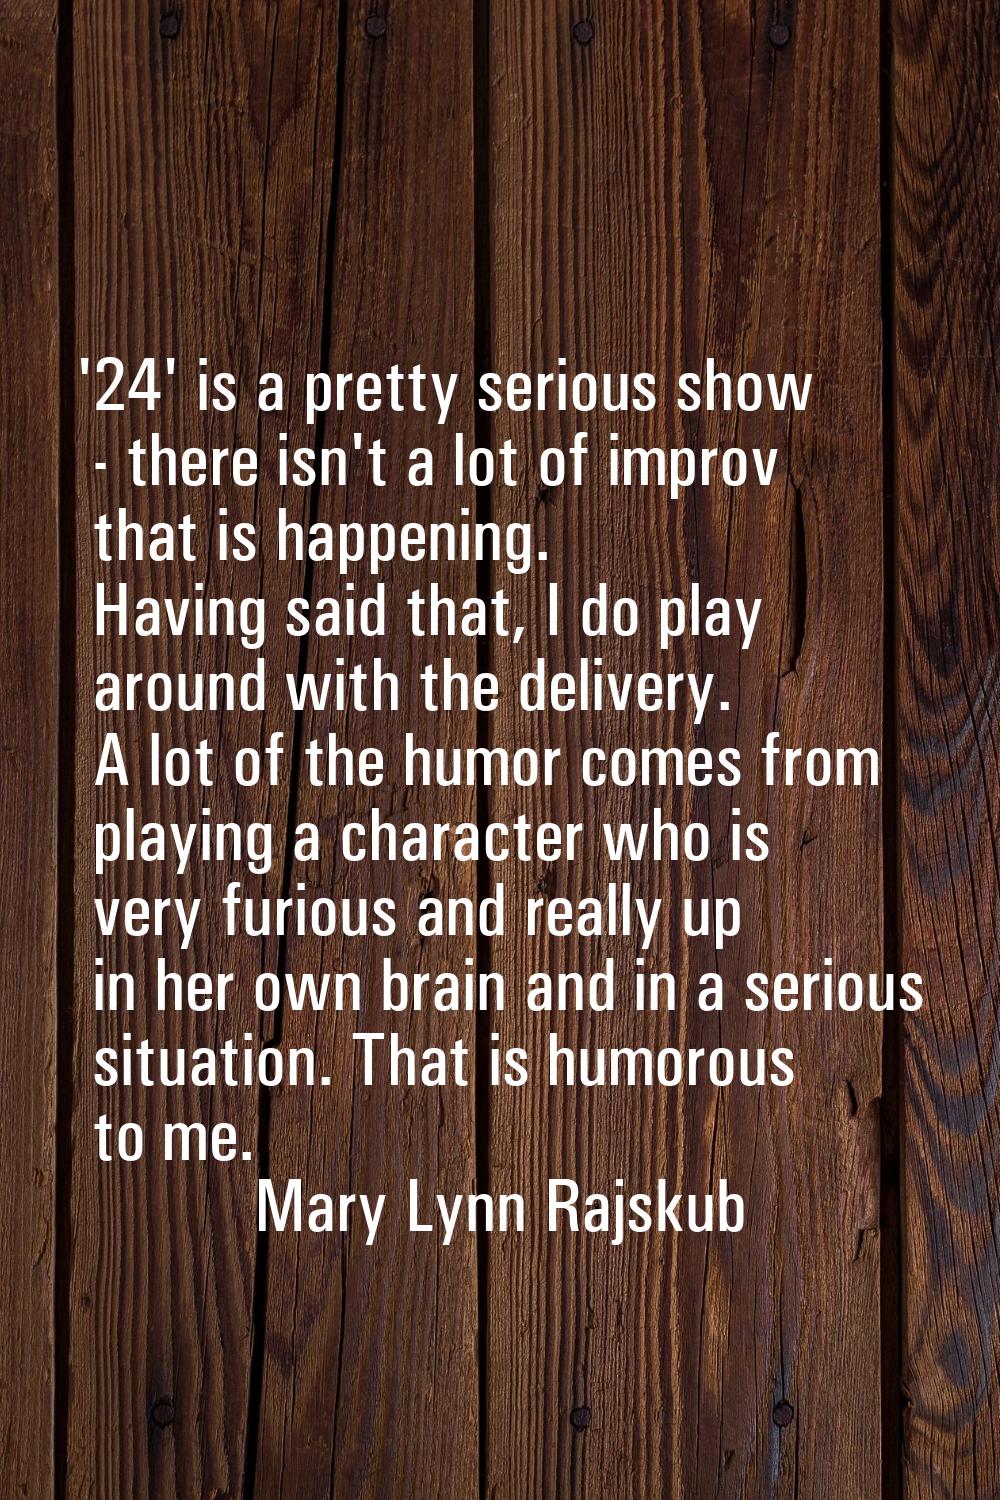 '24' is a pretty serious show - there isn't a lot of improv that is happening. Having said that, I 